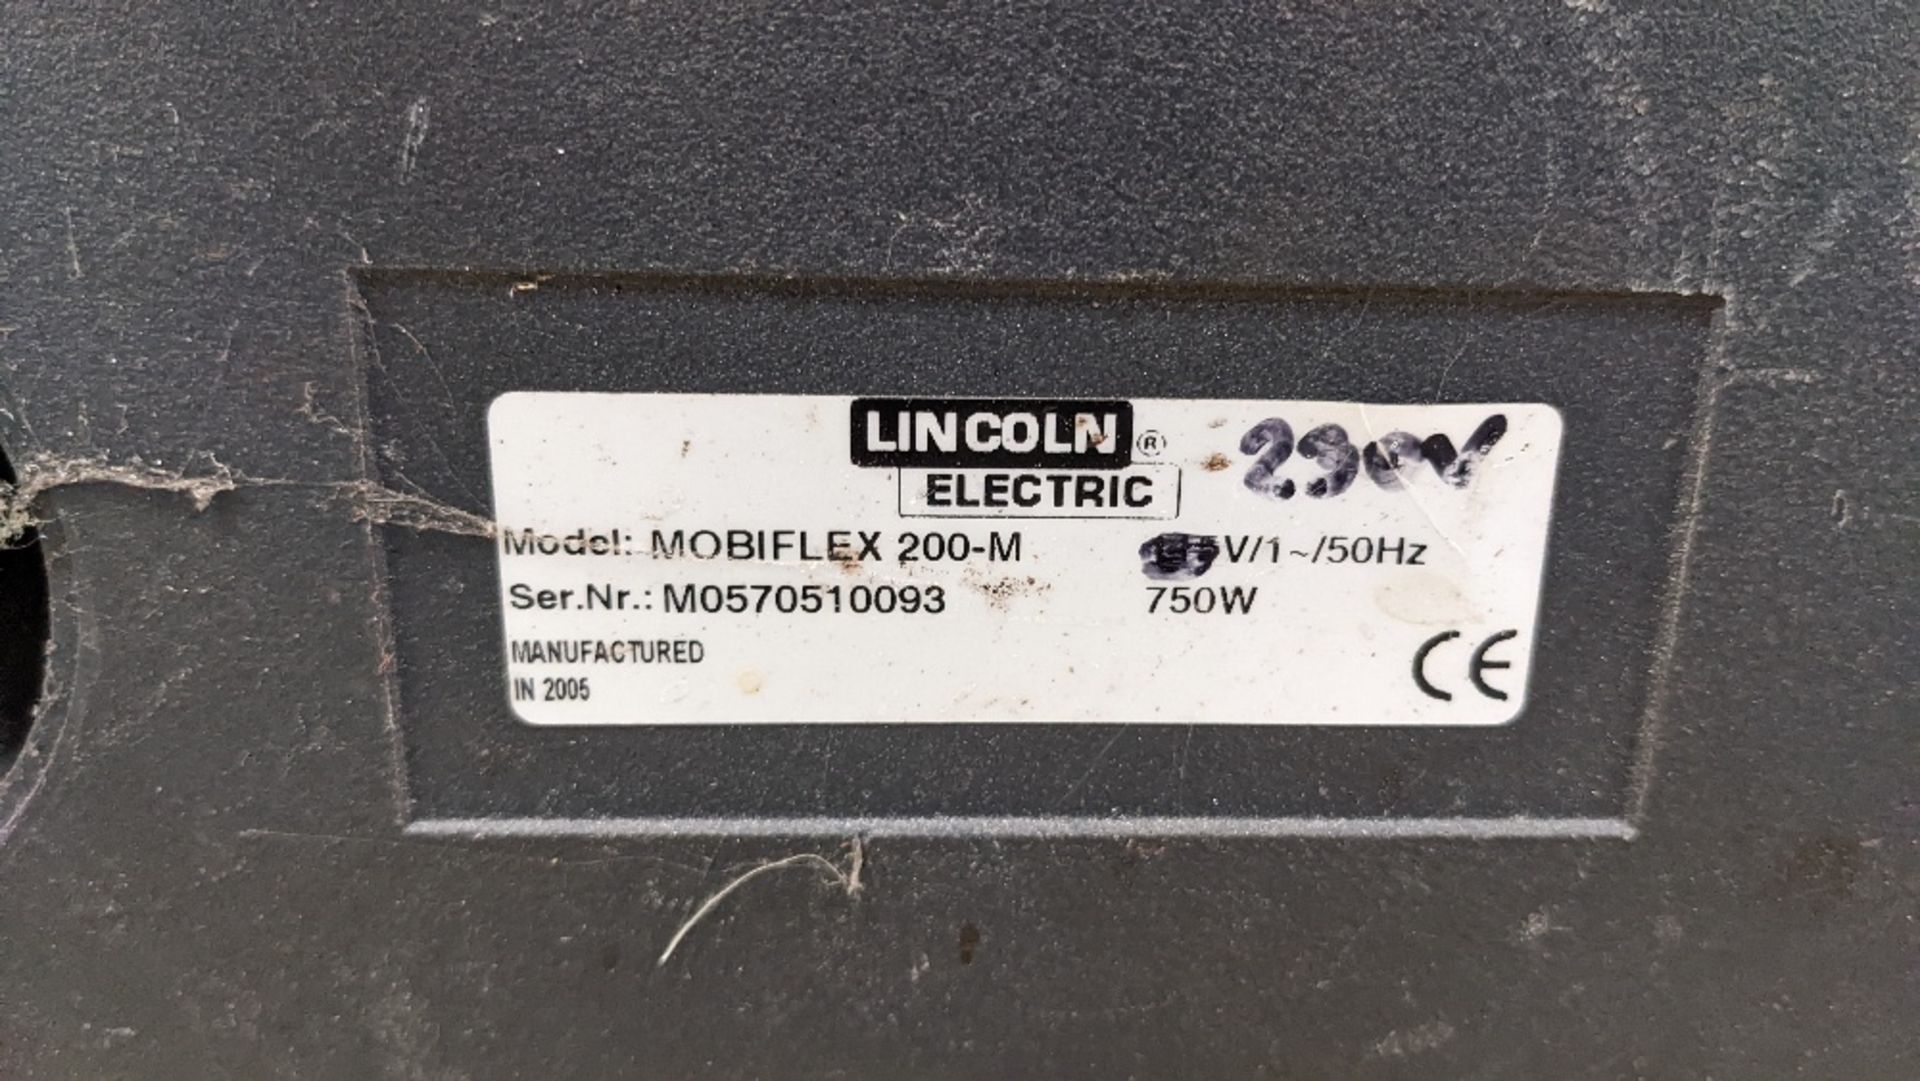 Lincoln Electric 240v Mobi-flex 200-M fume extractor (2005) - Image 4 of 5